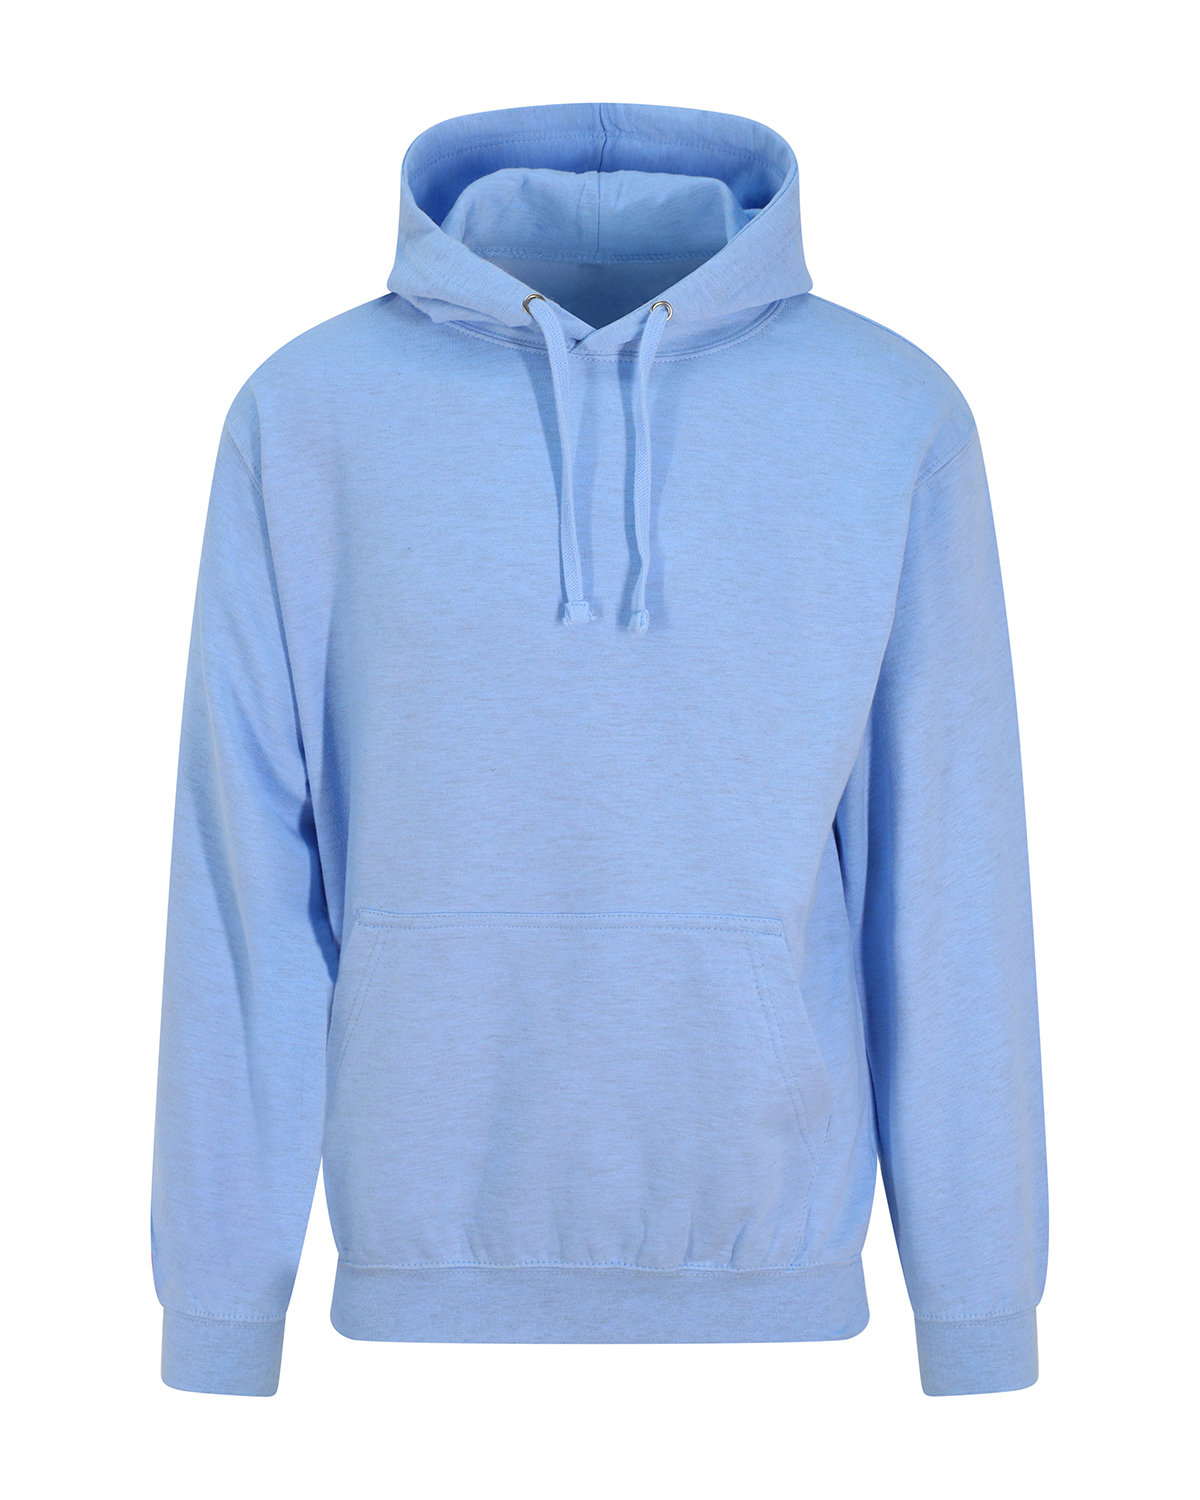 Adult Surf Collection Hooded Fleece-